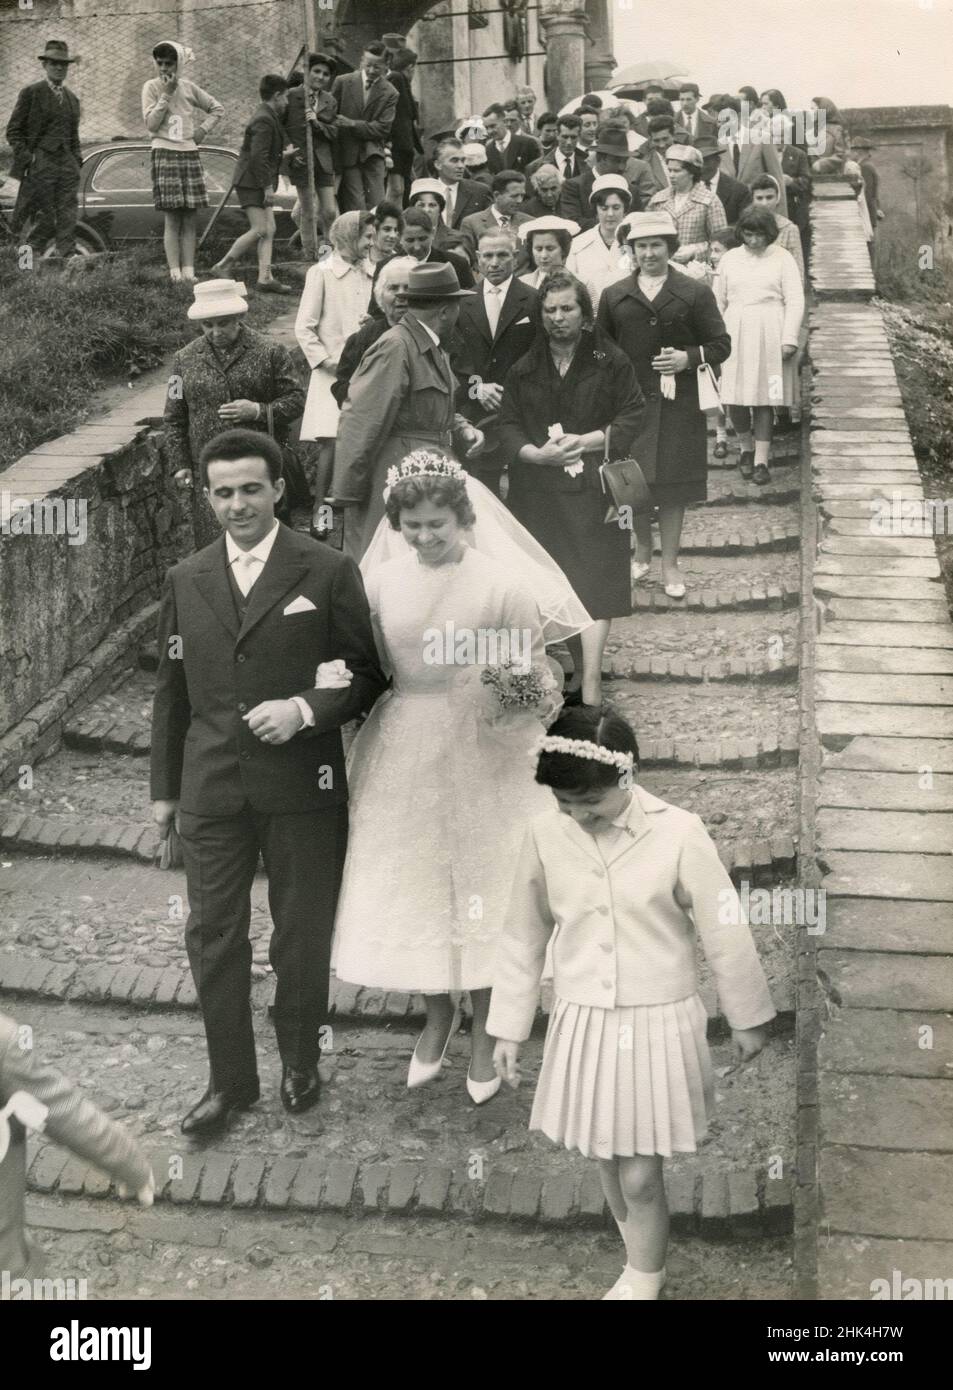 Wedding in Italy during the 1950s: The bride and the groom just married go out of the church with the children followed by all the guests Stock Photo